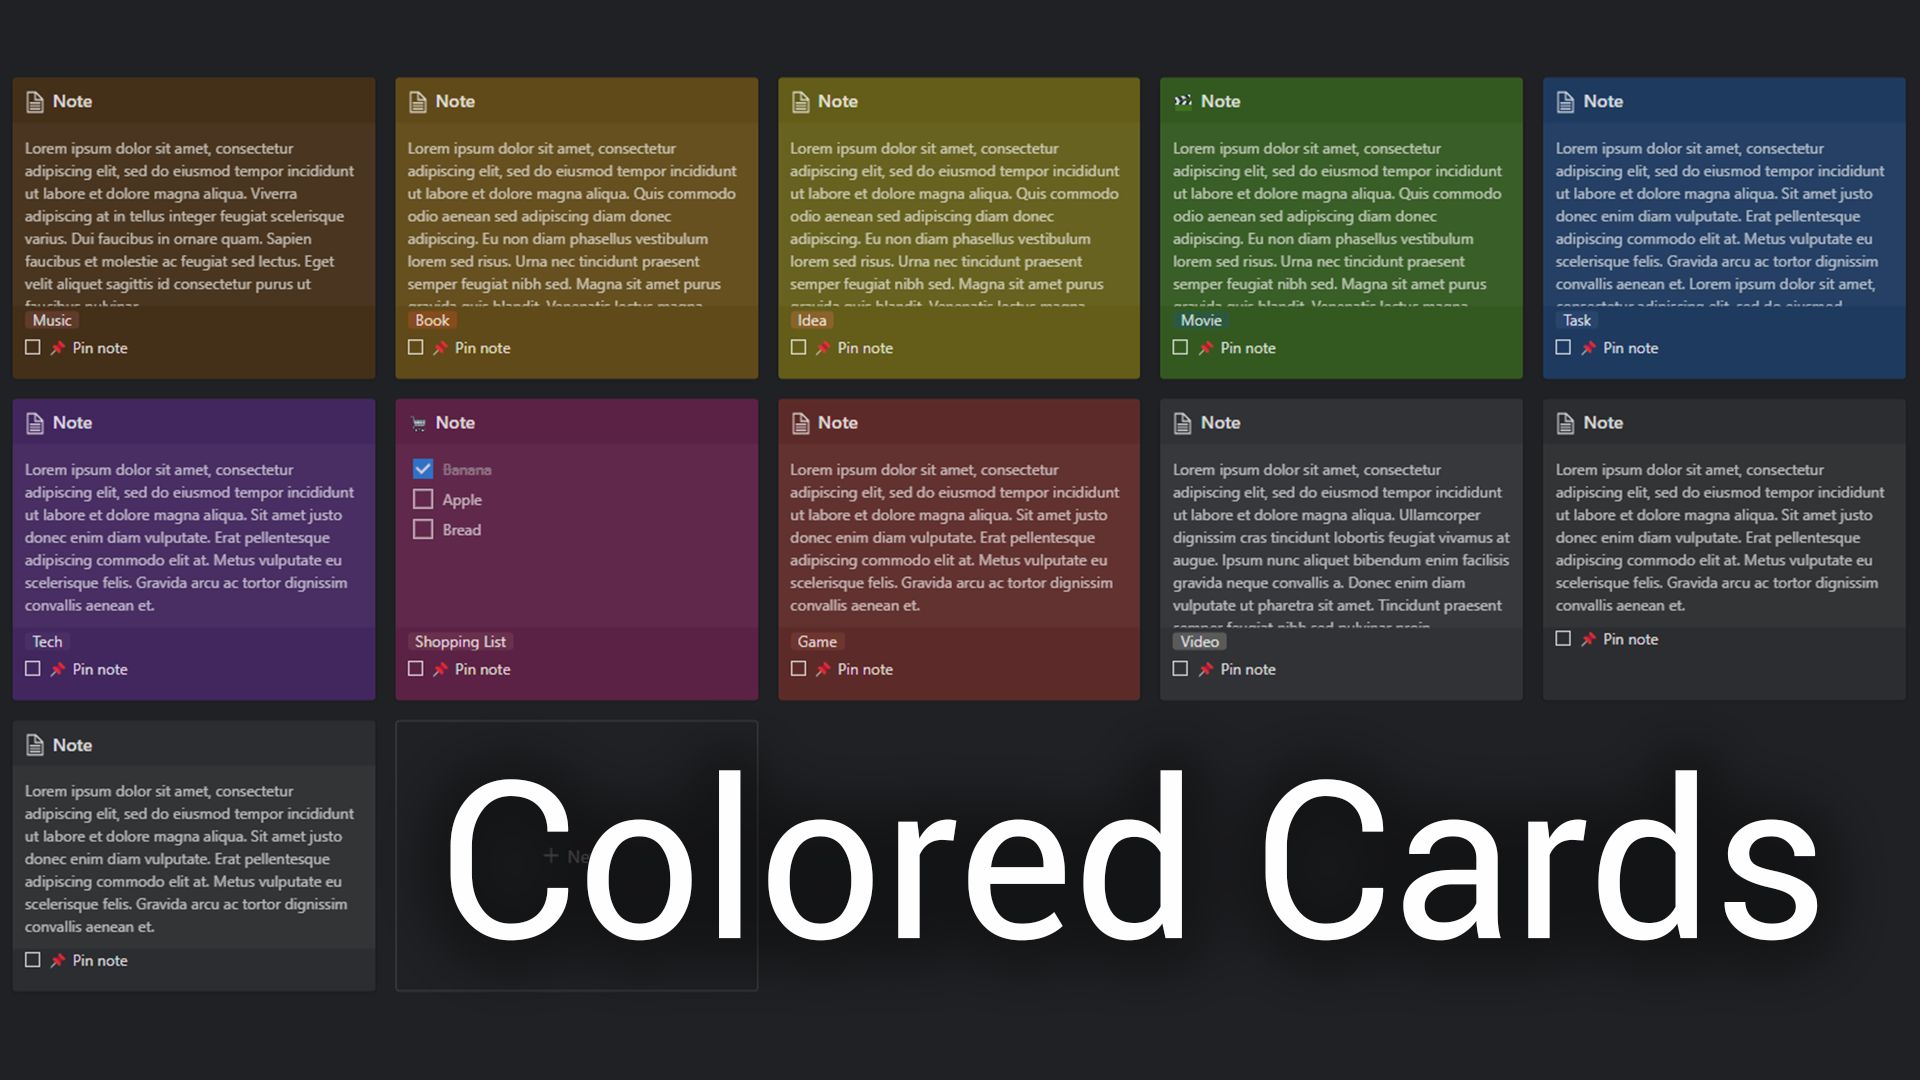 Colored Cards in the Gallery view - notion.so screenshot